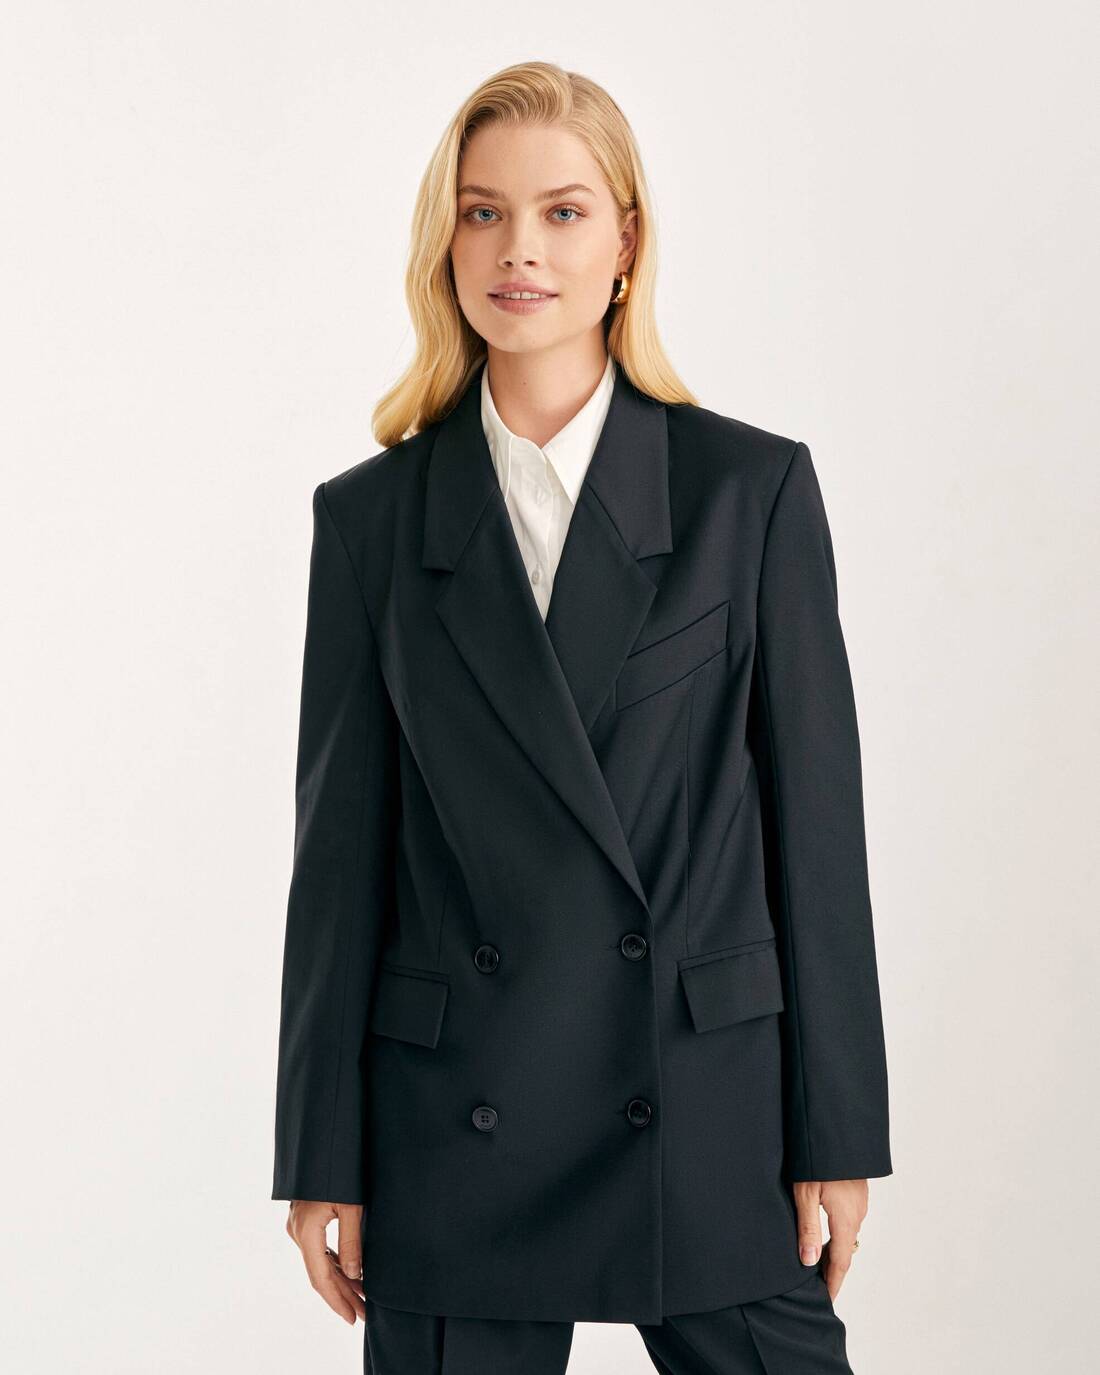 Straight cut double-breasted jacket